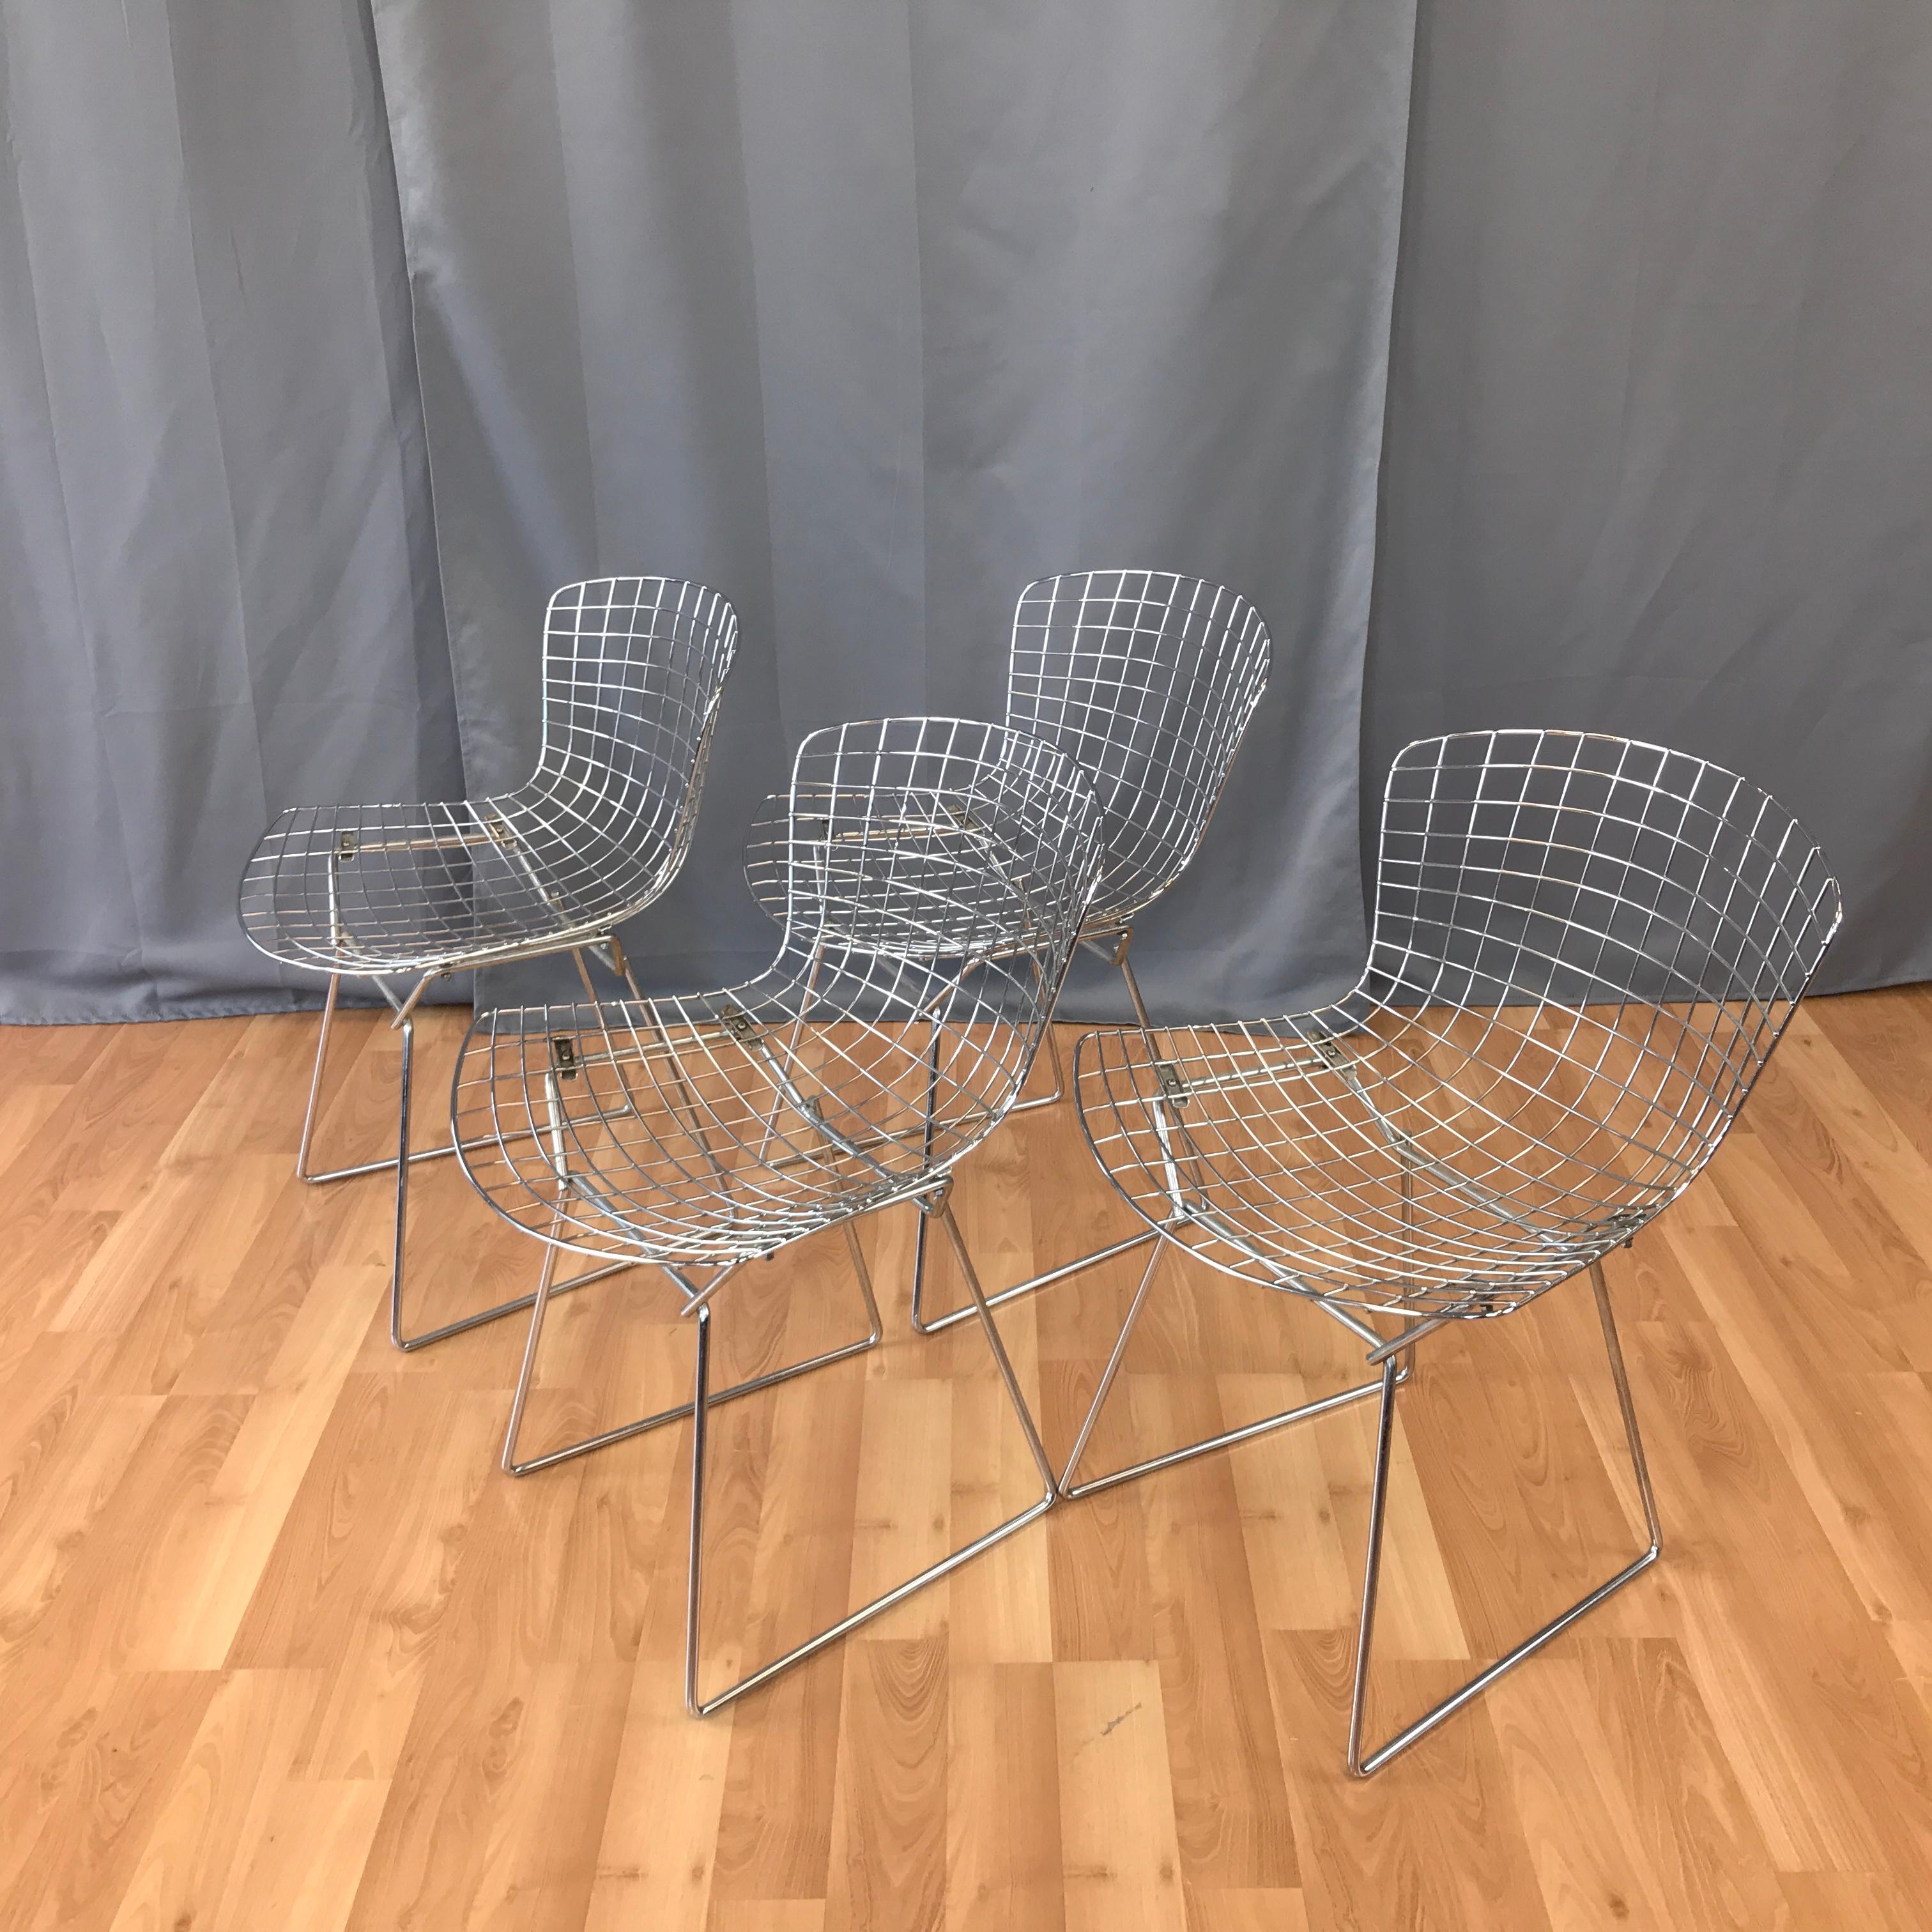 A set of four Bertoia chrome side chair for Knoll.
This design was the result of Bertoia's sculpture studies in bending metal rods... their a Classic of Mid-Century Modern design.
These are circa 1980s made.